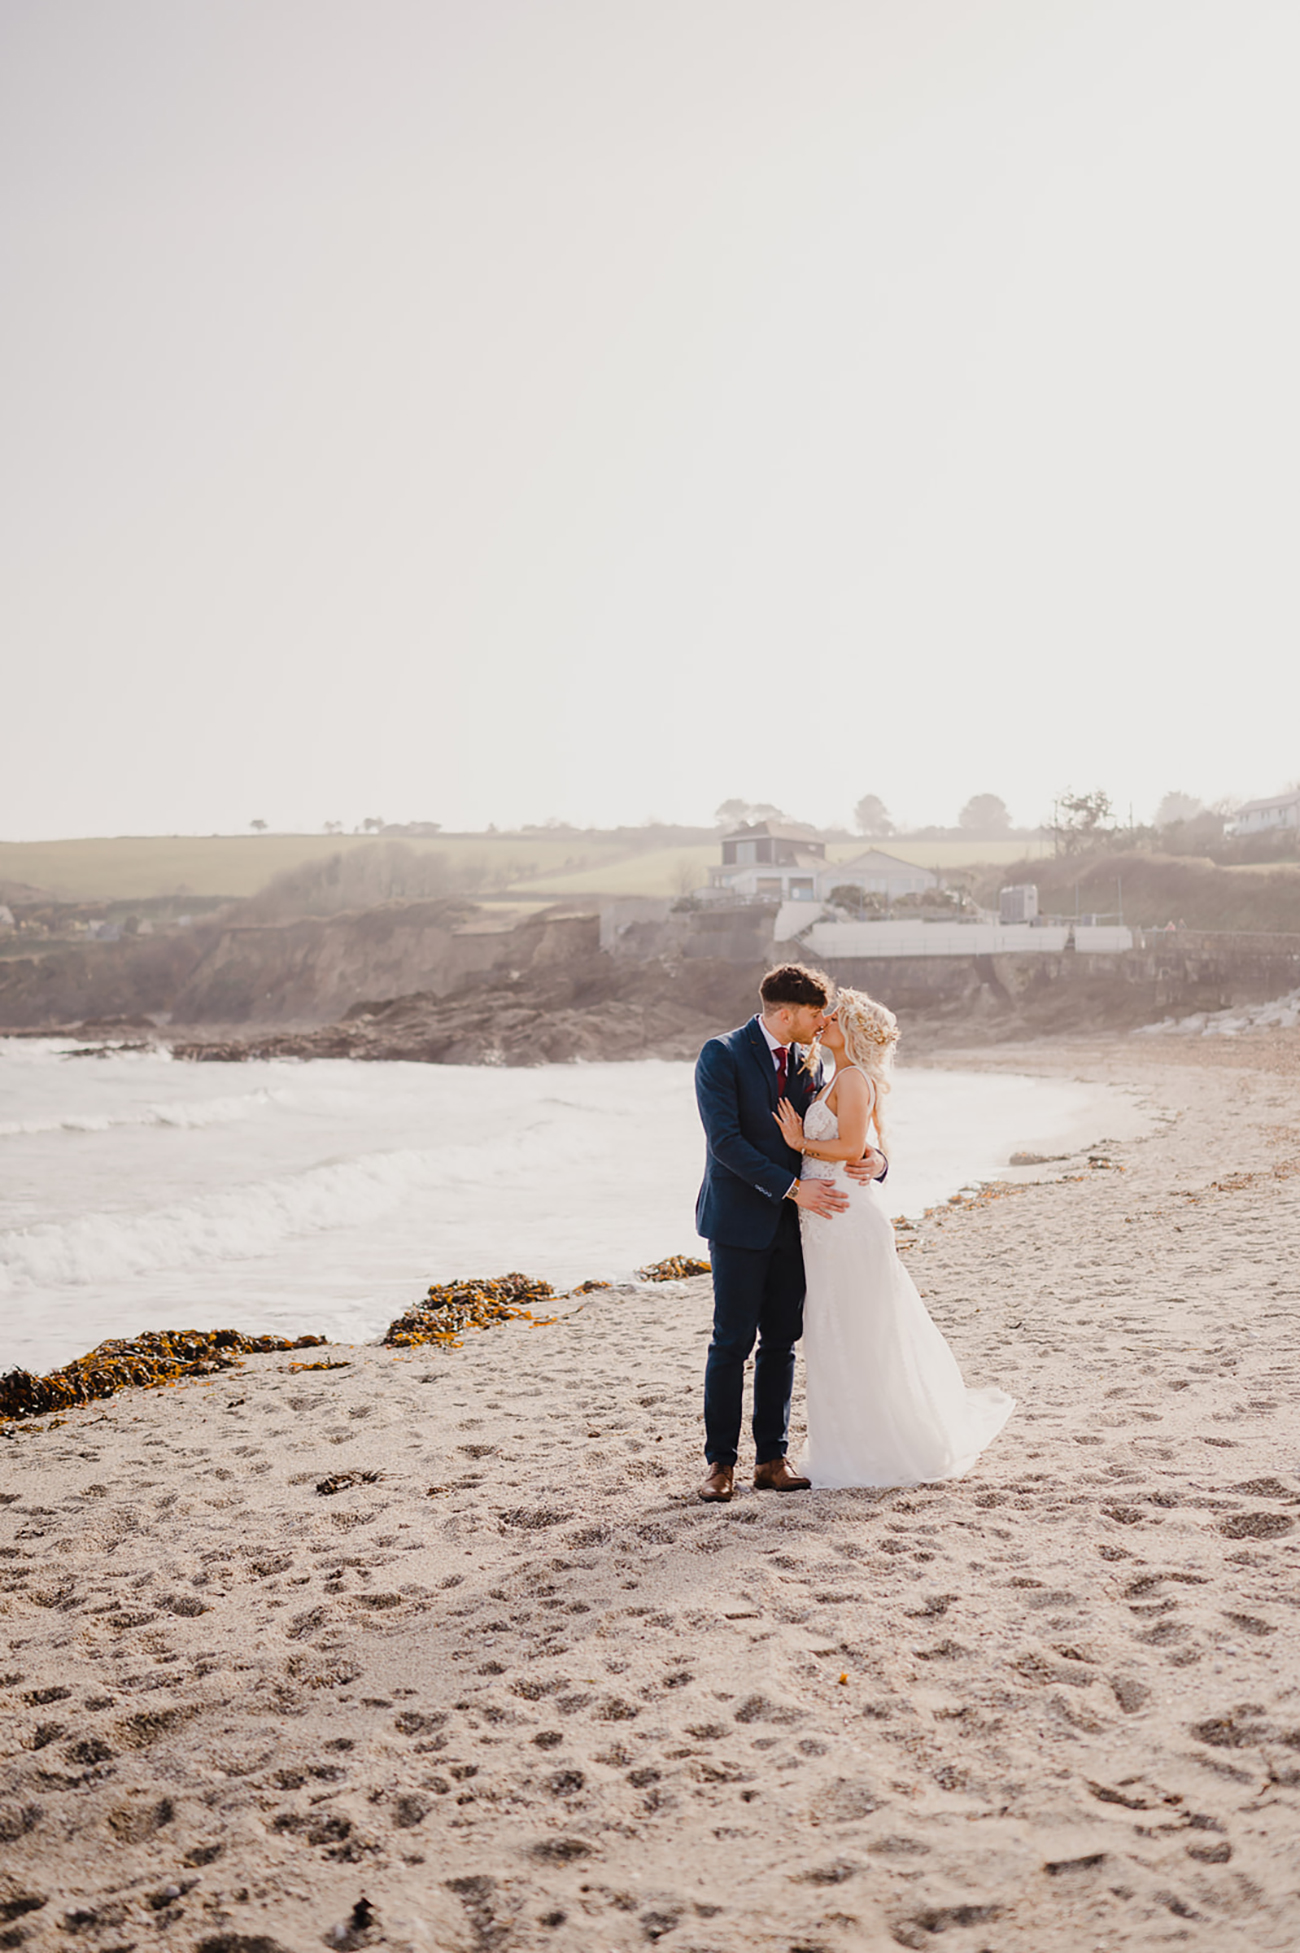 Styled Shoot Falmouth GolF Club Cornwall March 2022 356 Websize